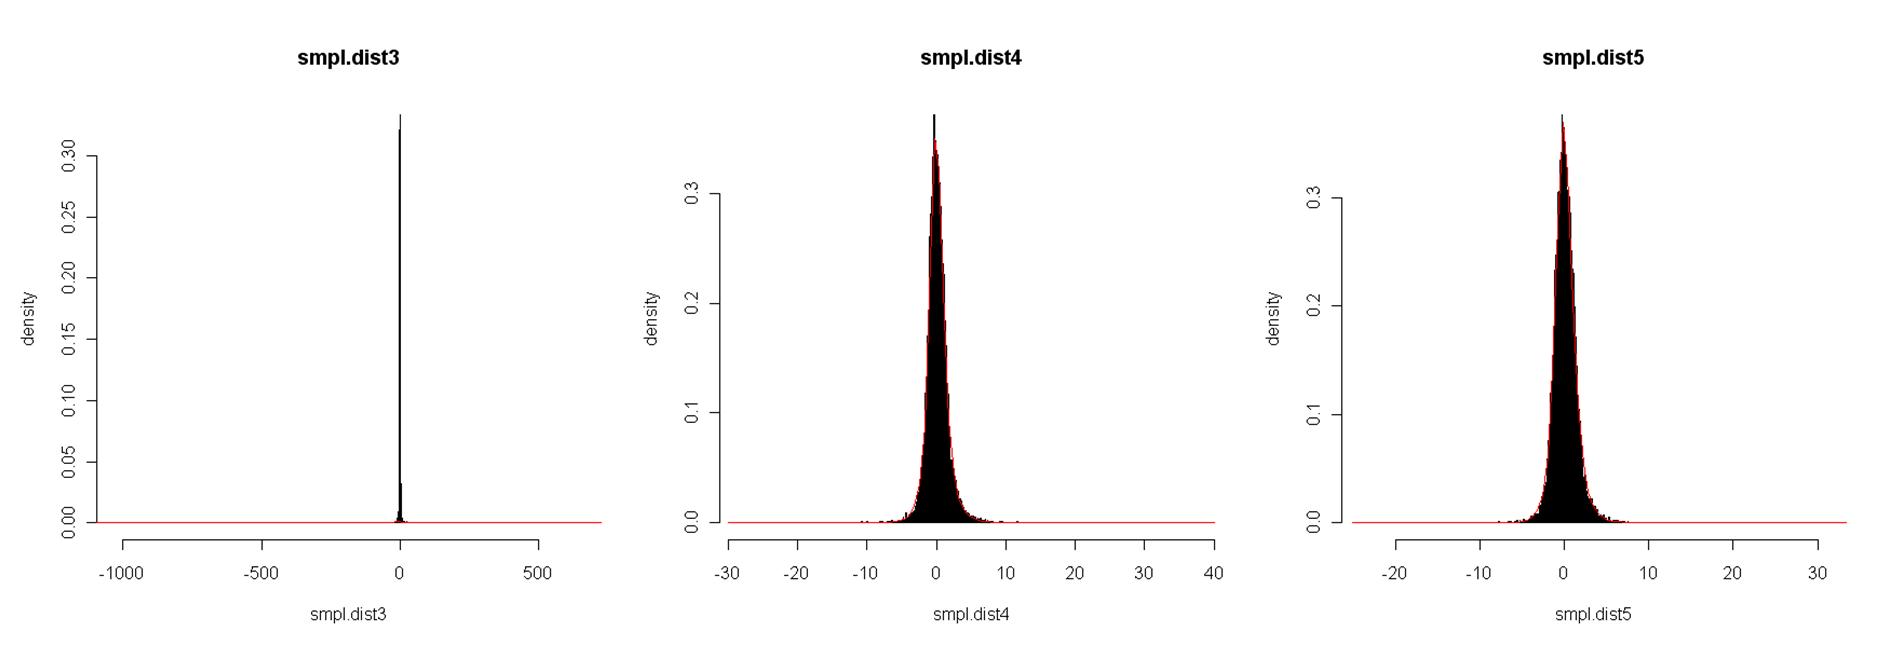 Image of a sample distributions